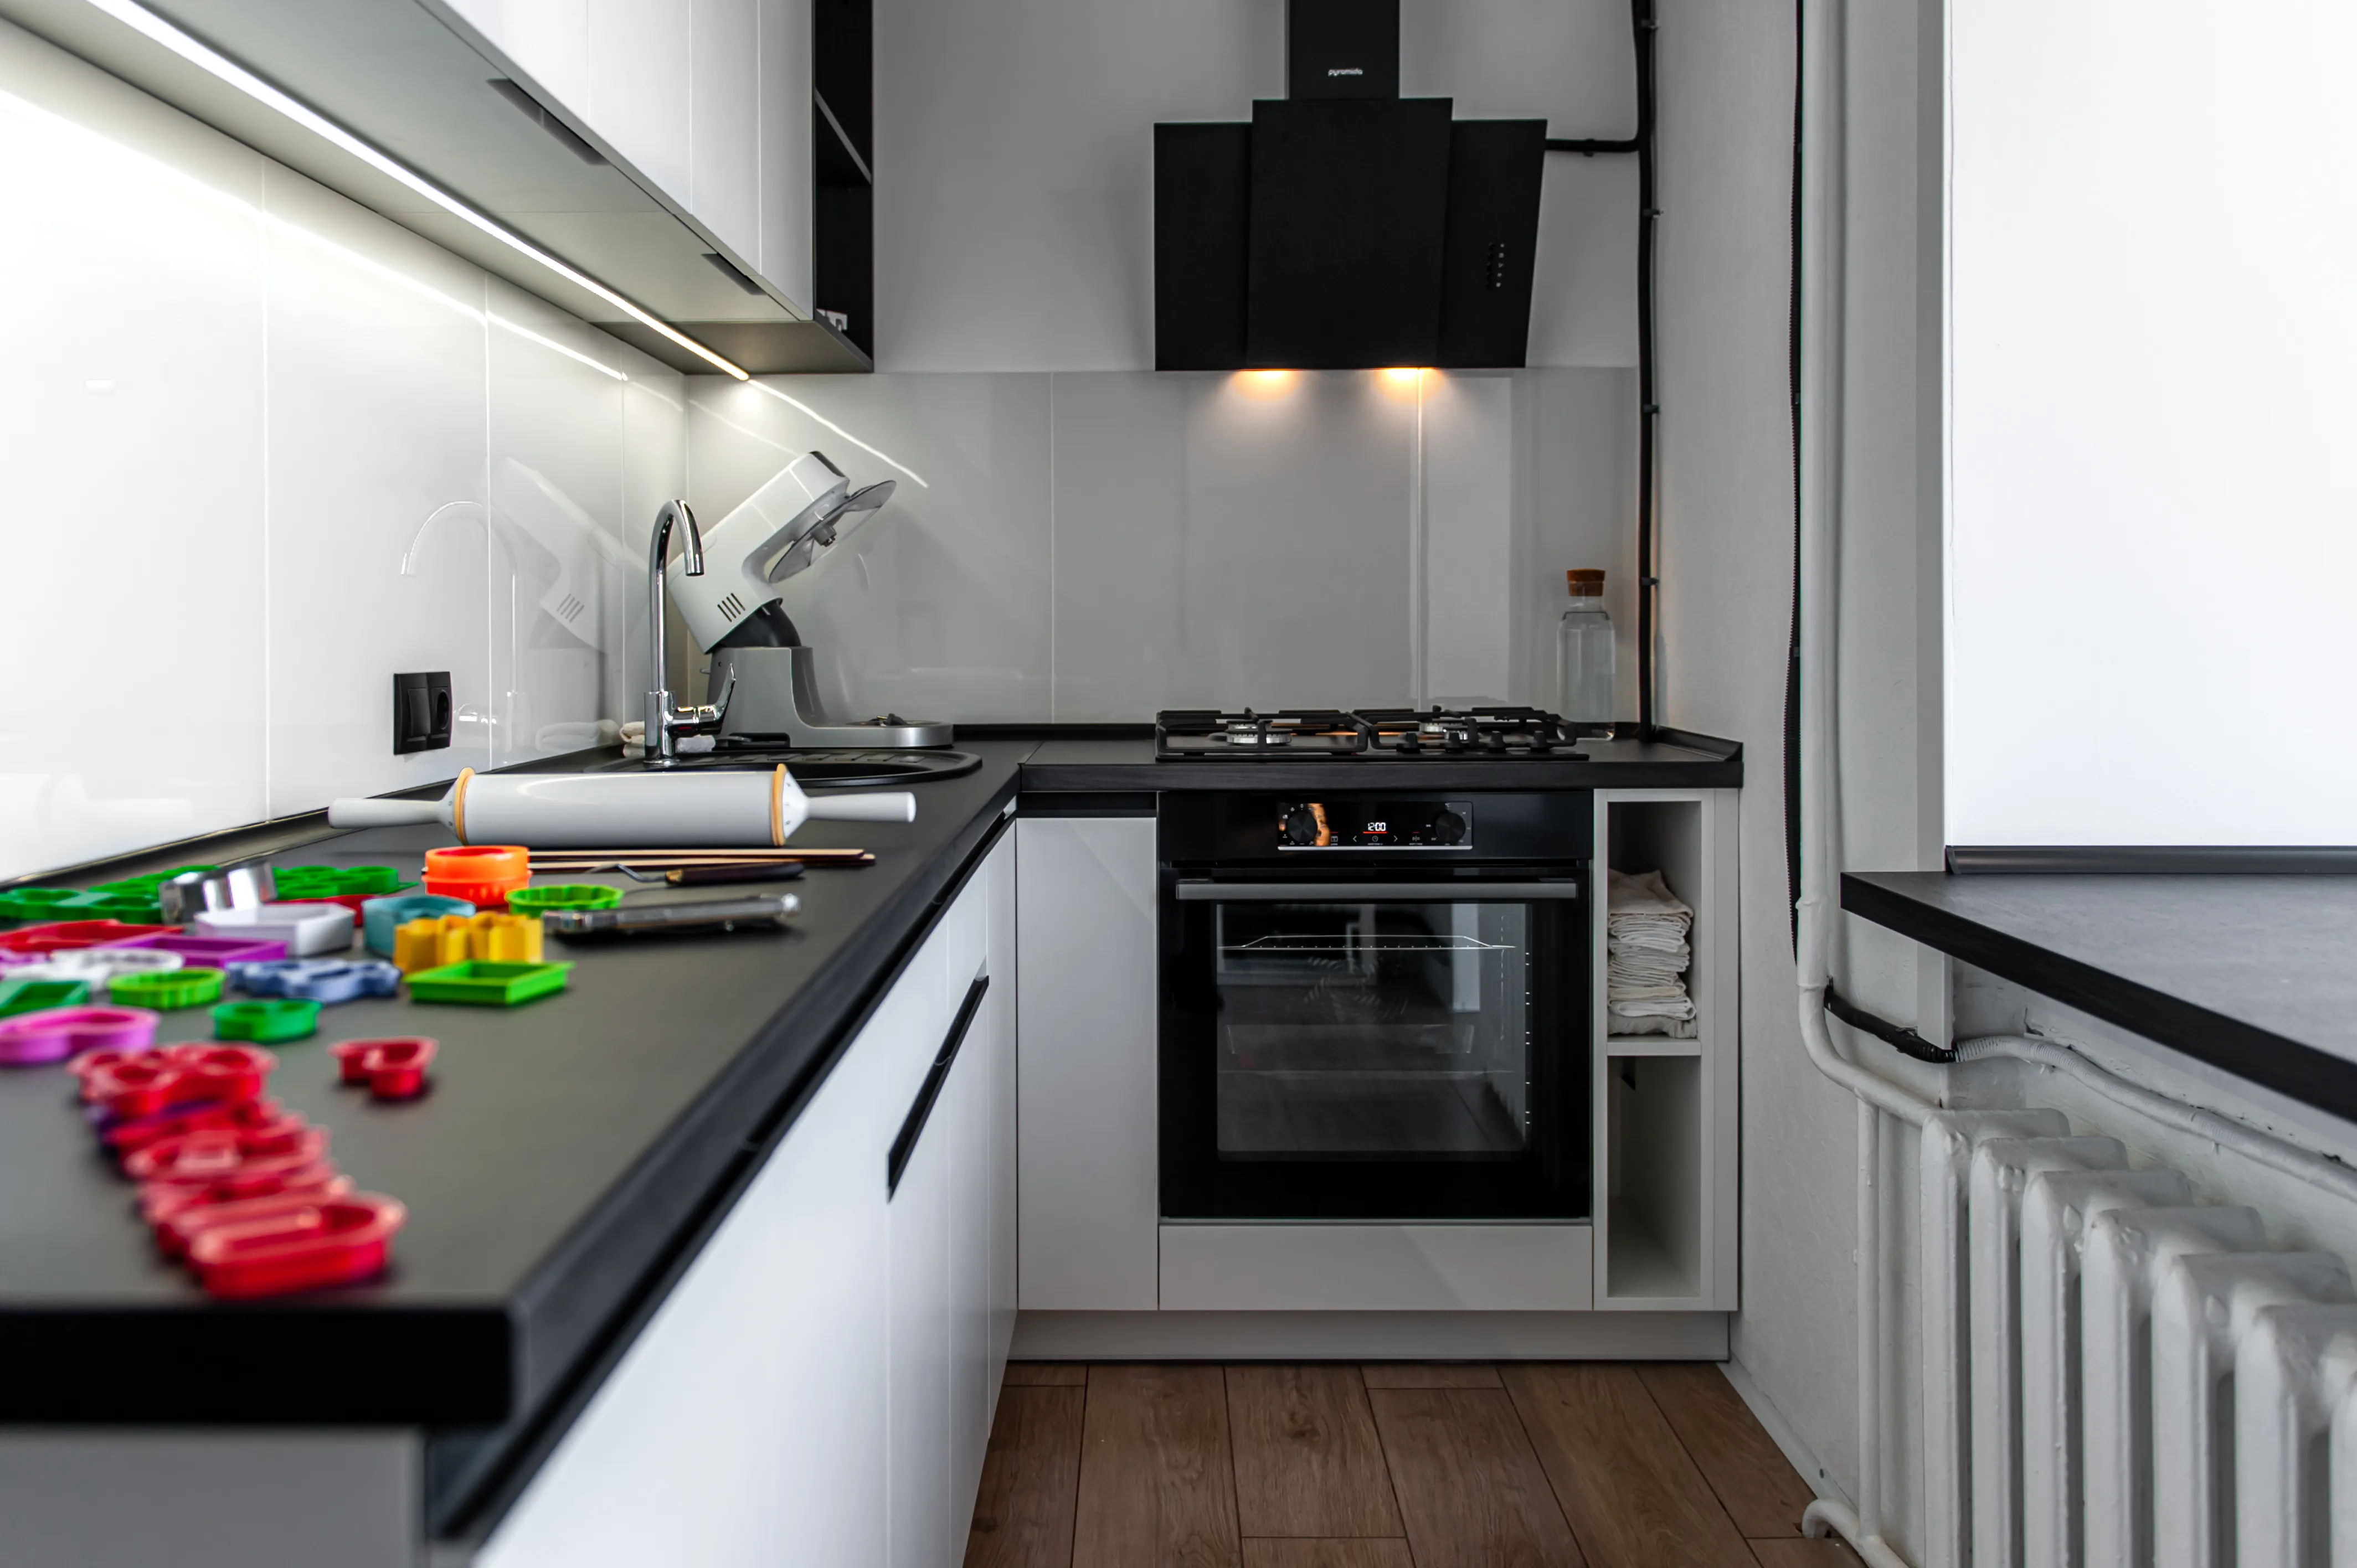 Colors Combinations Make Your Kitchen Look Stunning: Black and White